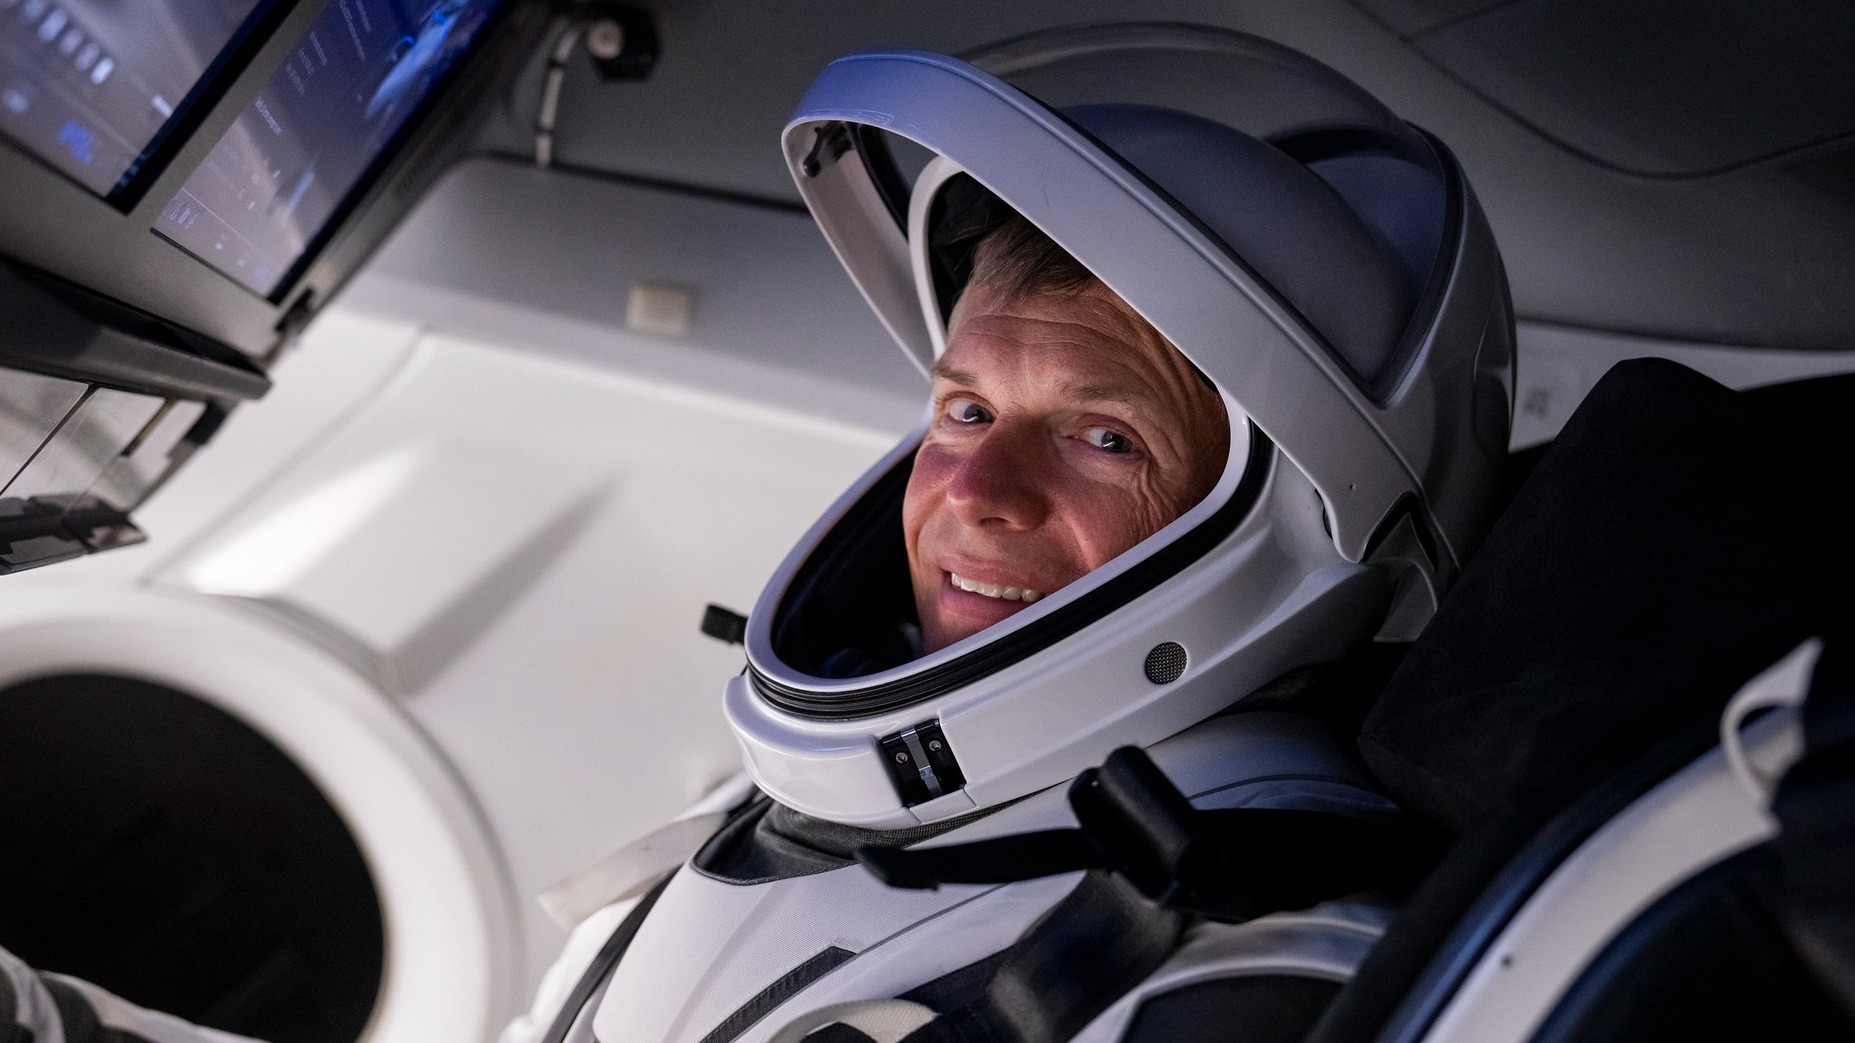 andreas mogensen in a spacesuit sitting in a spacecraft, looking at camera and smiling. screens are visible to the upper left of image